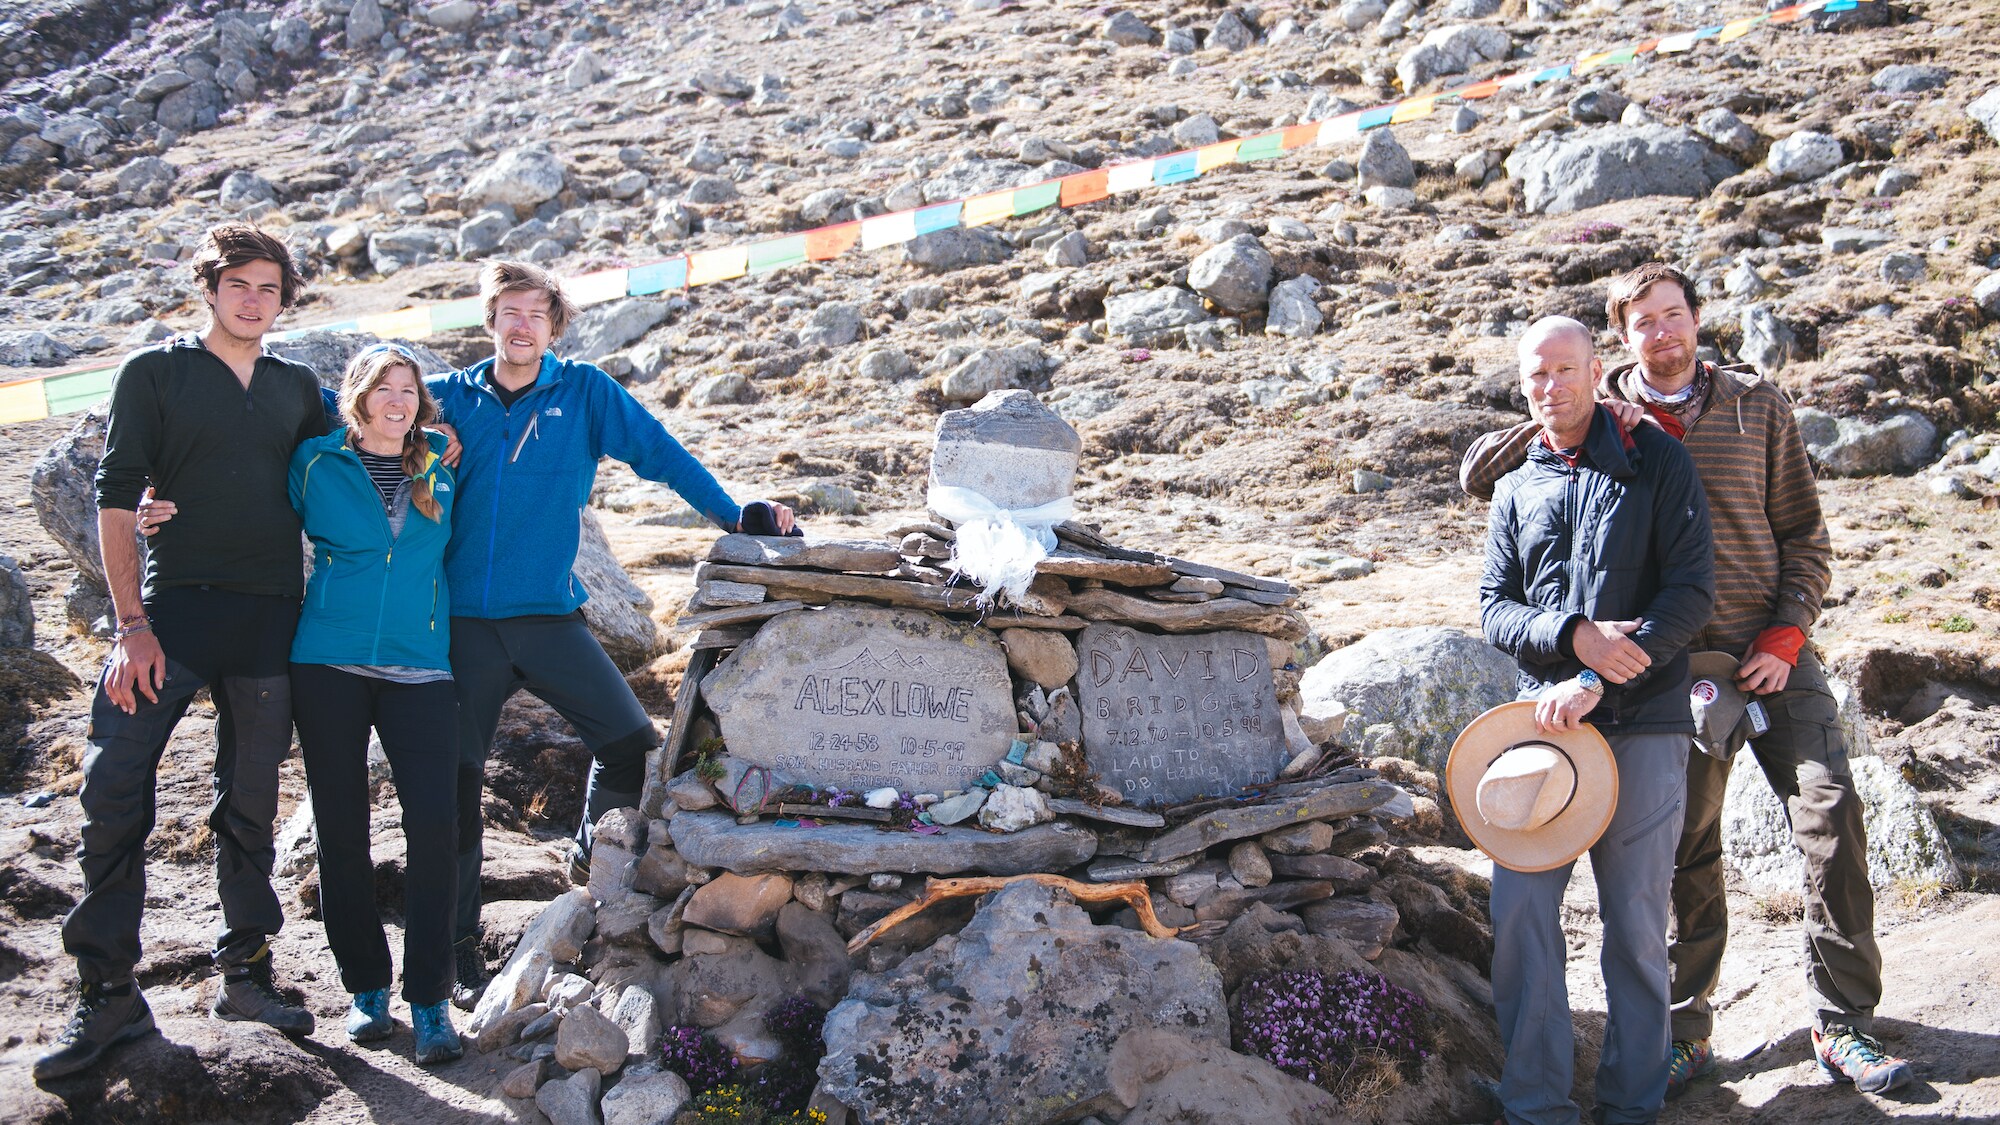 Tibet - Lowe-Anker family at the basecamp of Shishapangma memorial site for Alex Lowe and David Bridges. (National Geographic/Max Lowe)